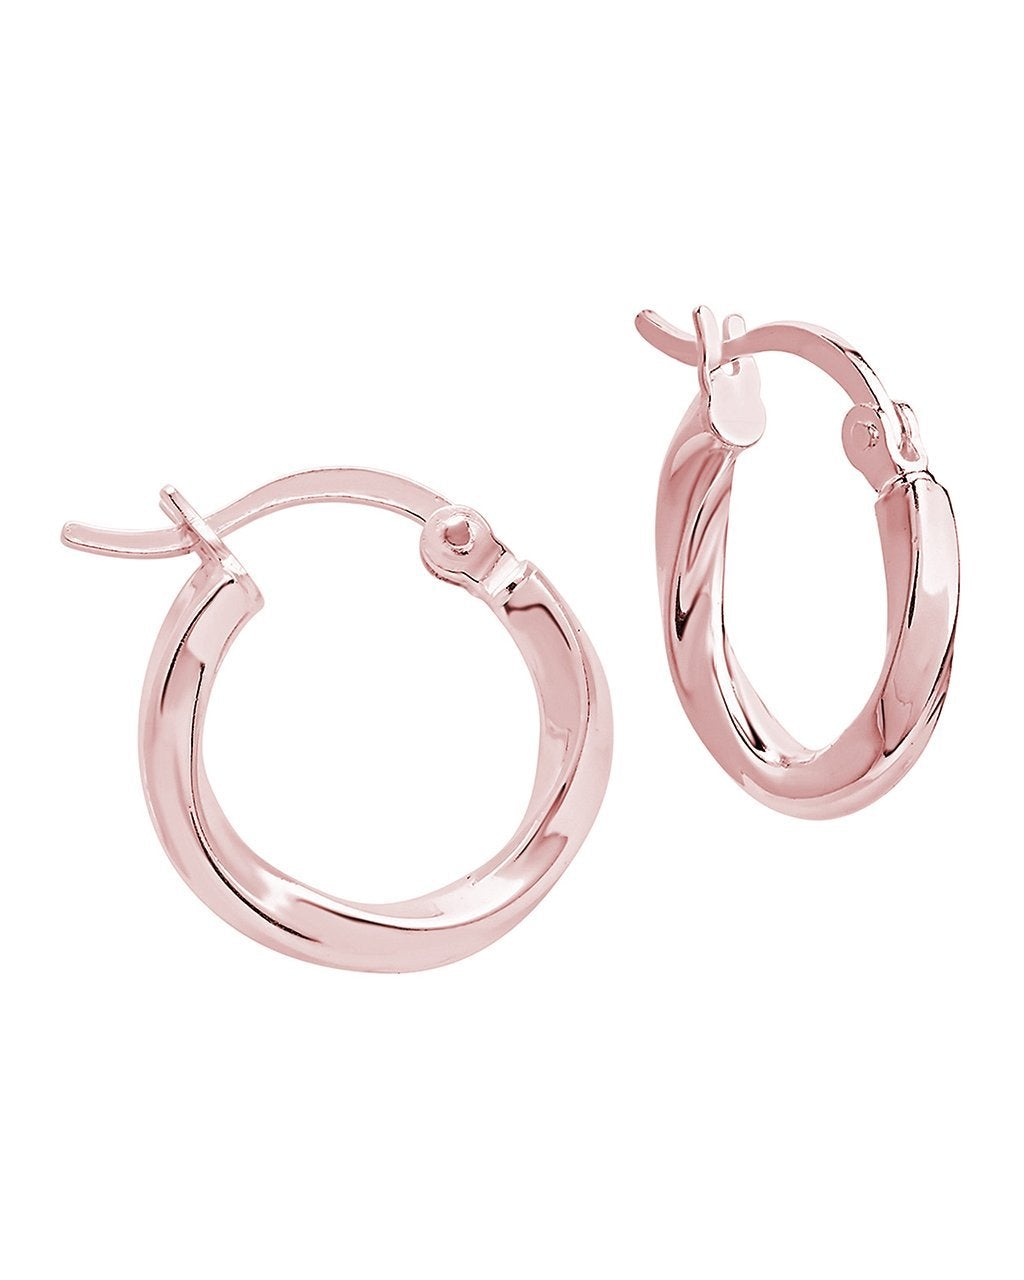 Dainty Sterling Silver Simple Twist Hoops Earring Sterling Forever Rose Gold 